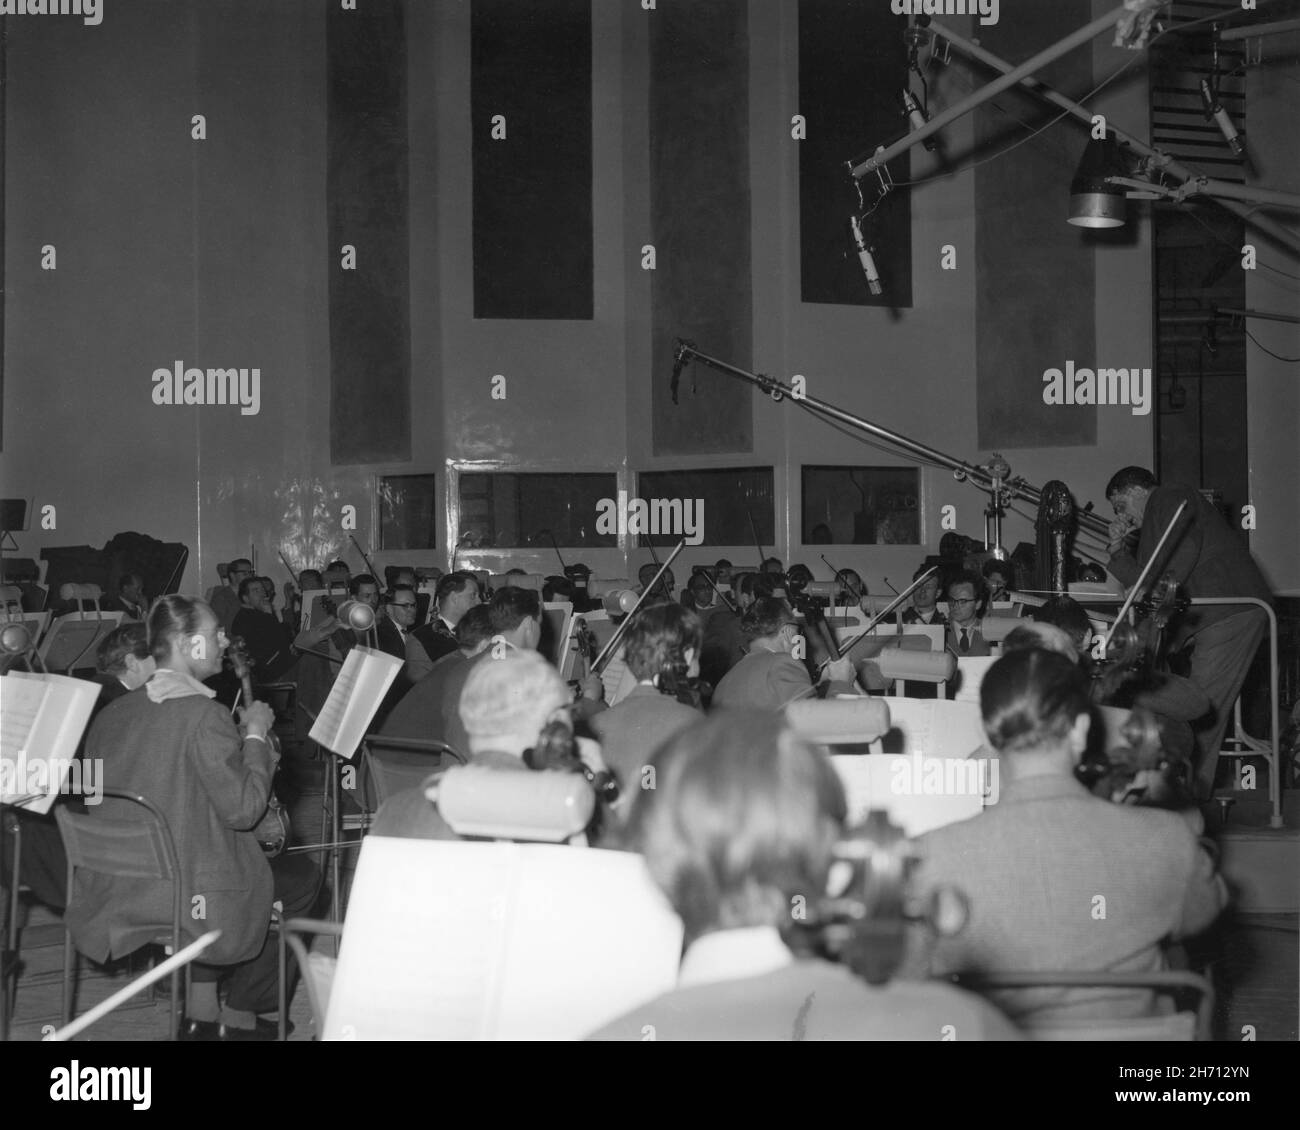 Film Composer BERNARD HERRMANN at Shepperton Studios in Autumn 1962 recording / conducting his score with the Royal Philharmonic Orchestra for JASON AND THE ARGONAUTS 1963 director DON CHAFFEY creator of special visual effects RAY HARRYHAUSEN Charles H. Schneer Productions / Columbia Pictures Stock Photo